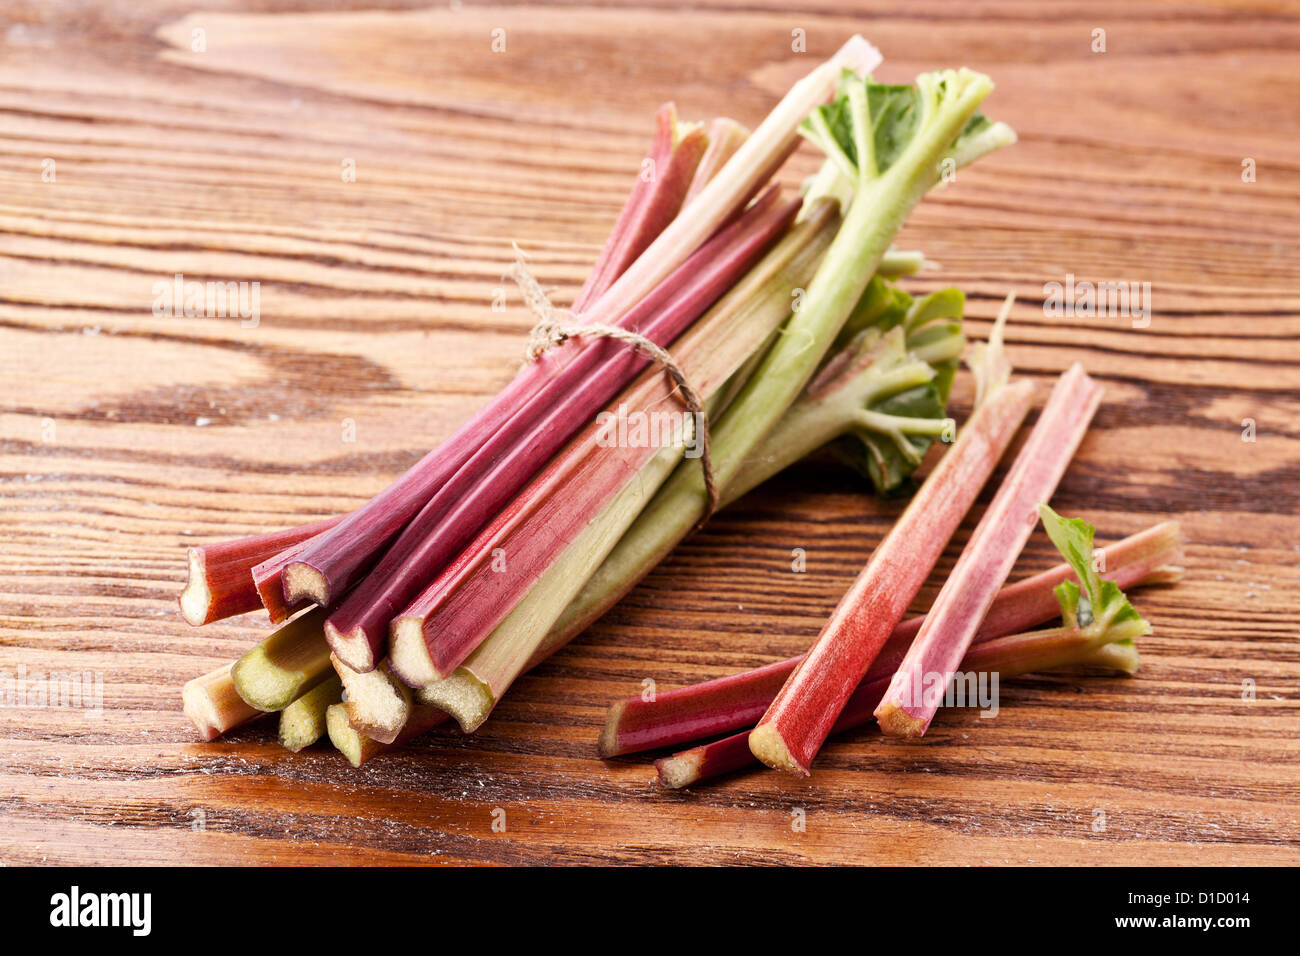 Rhubarb stalks on a wooden table. Stock Photo